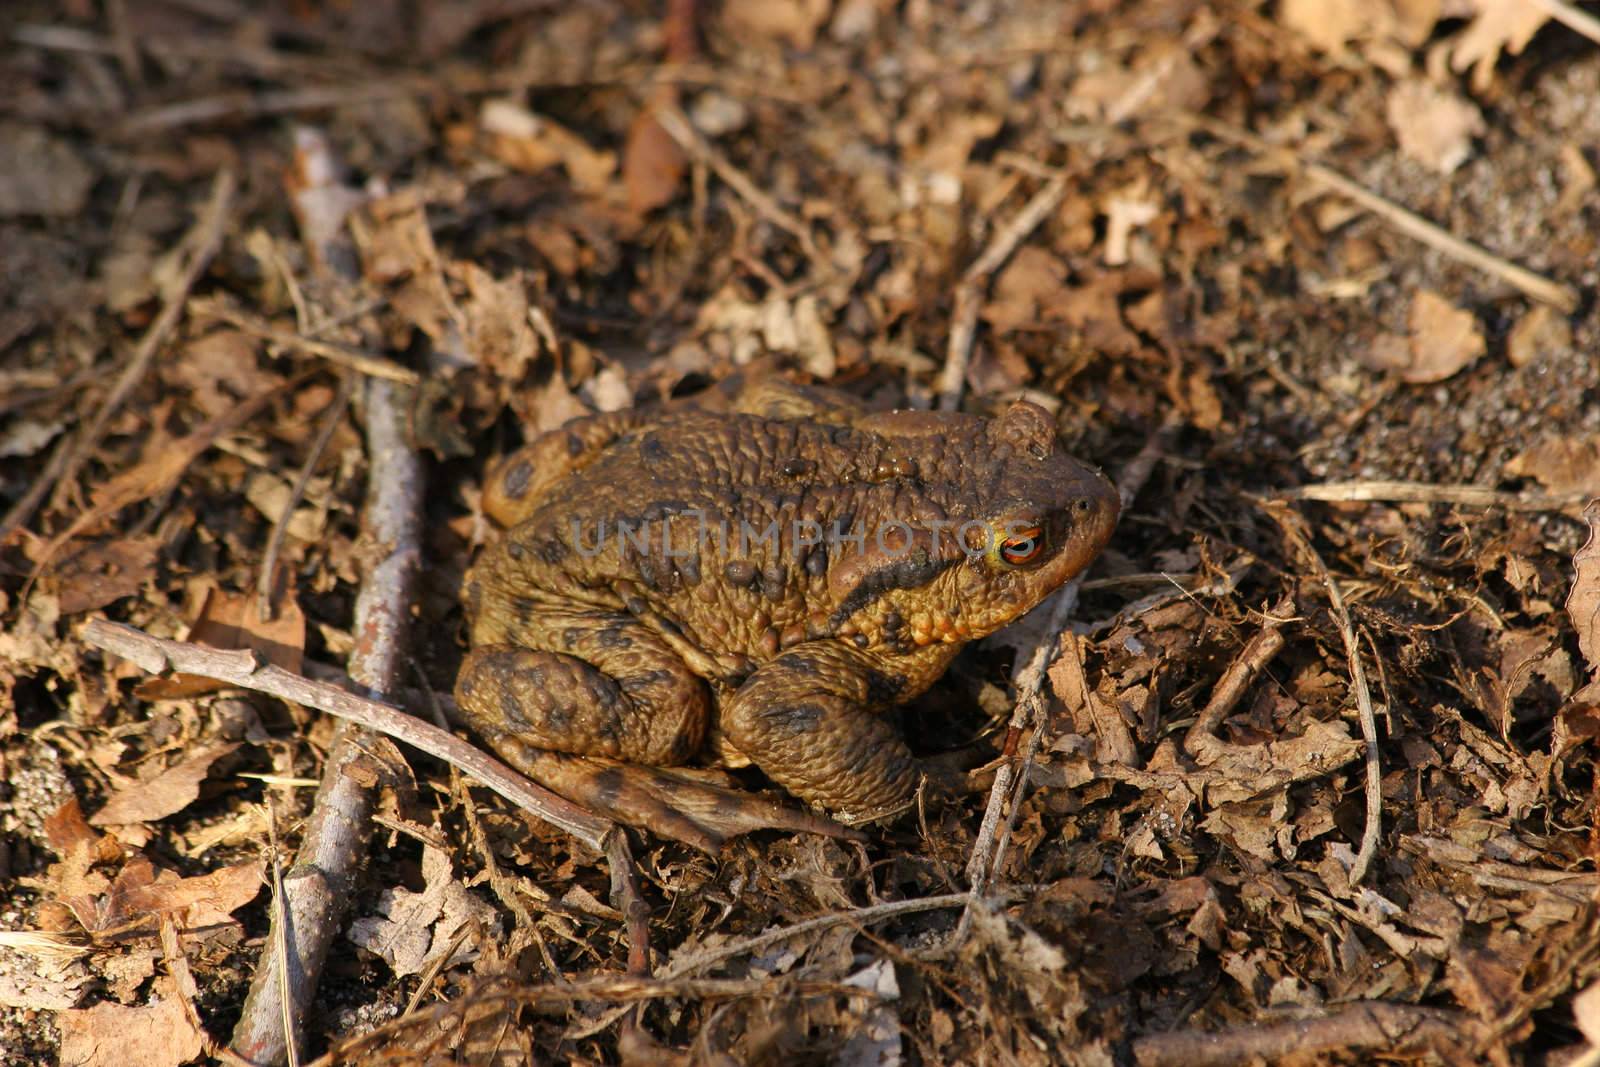 Ccommon toad (Bufo bufo) in early spring shortly after leaving  their winter hiding